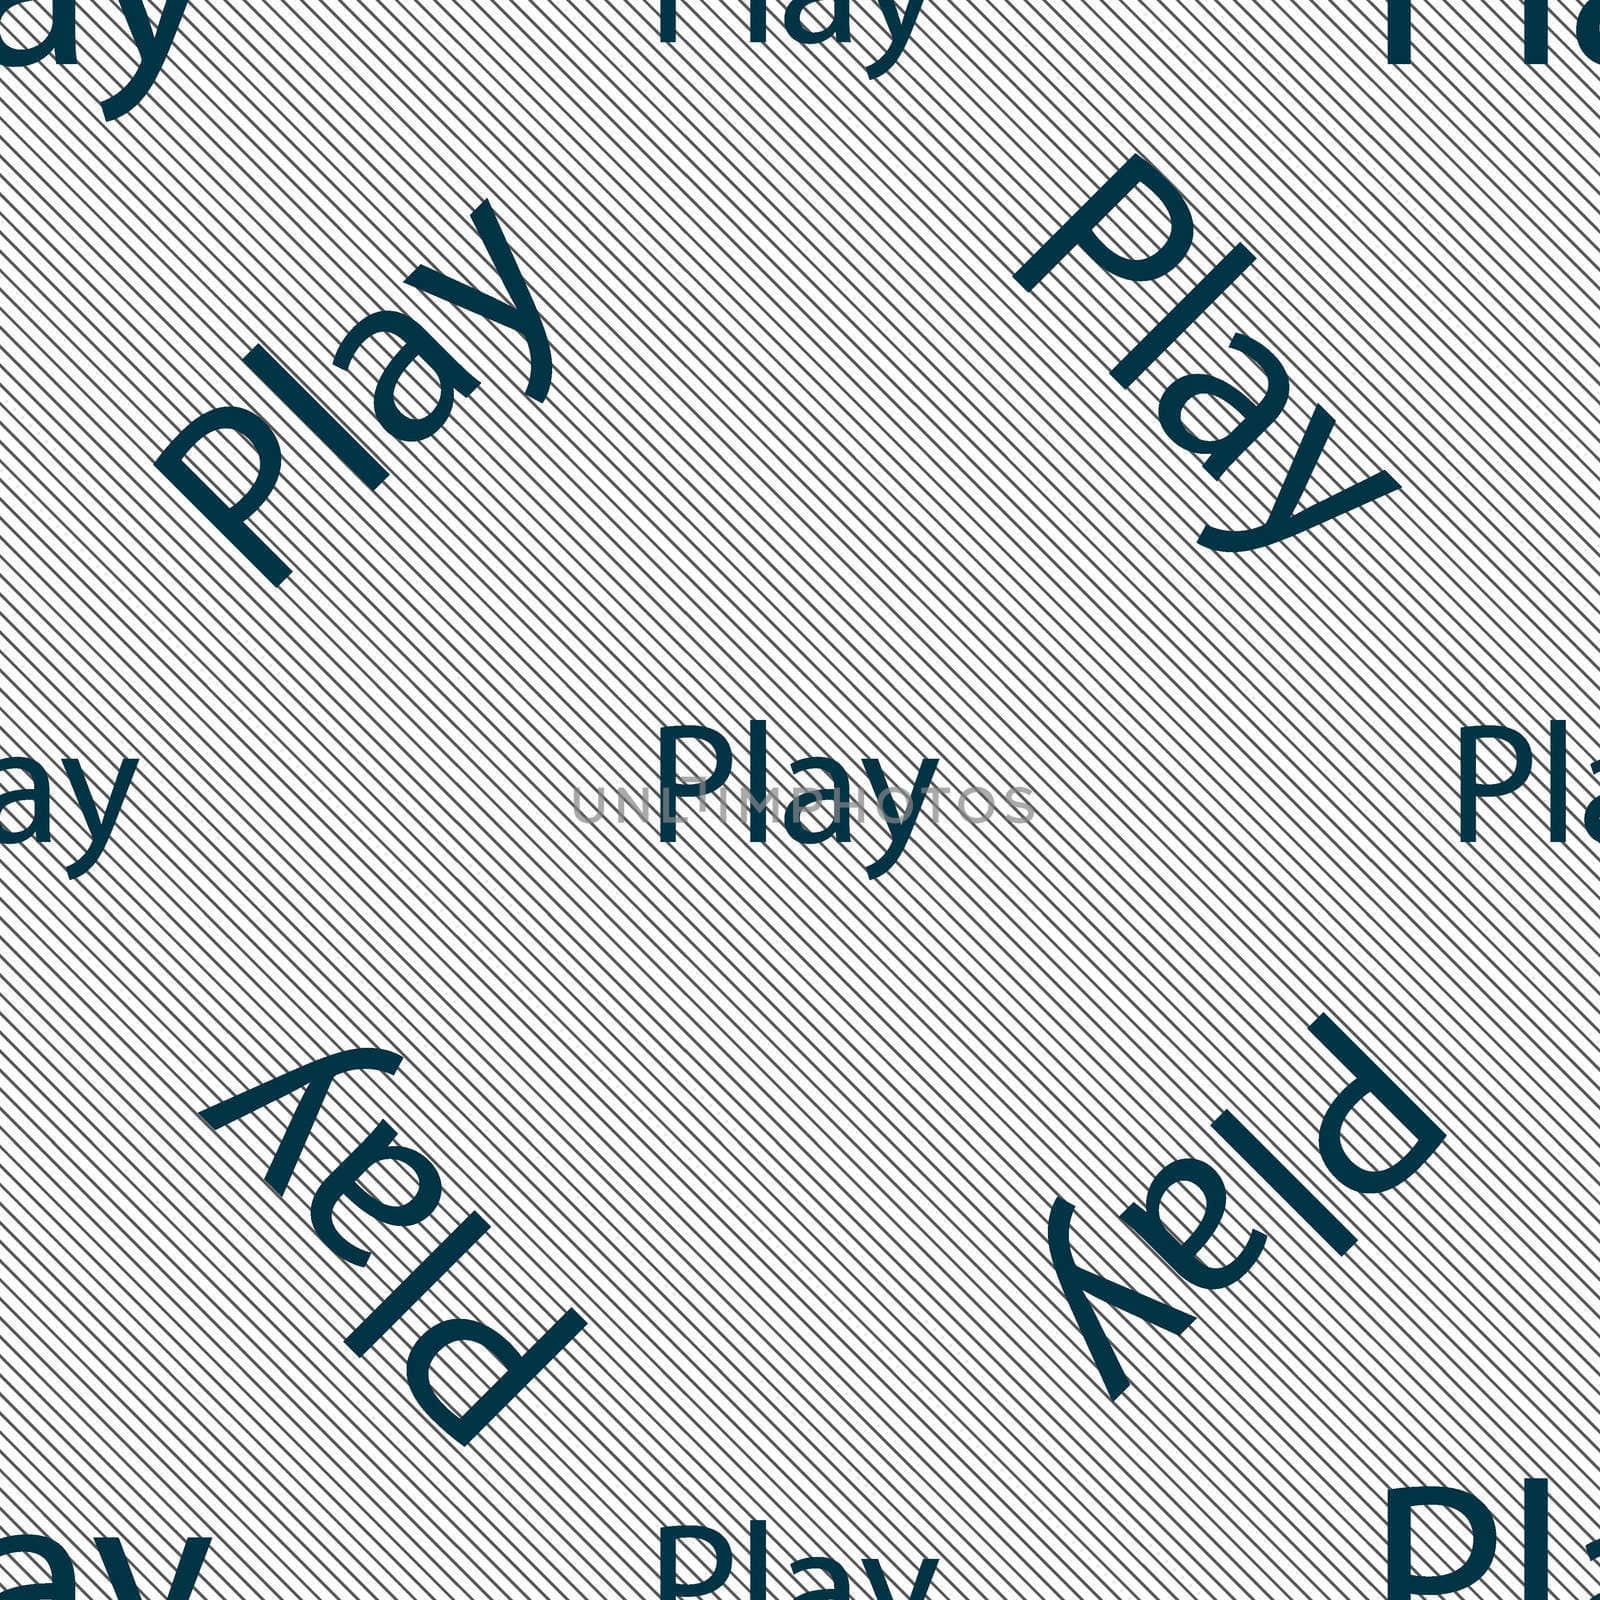 Play sign icon. symbol. Seamless pattern with geometric texture. illustration